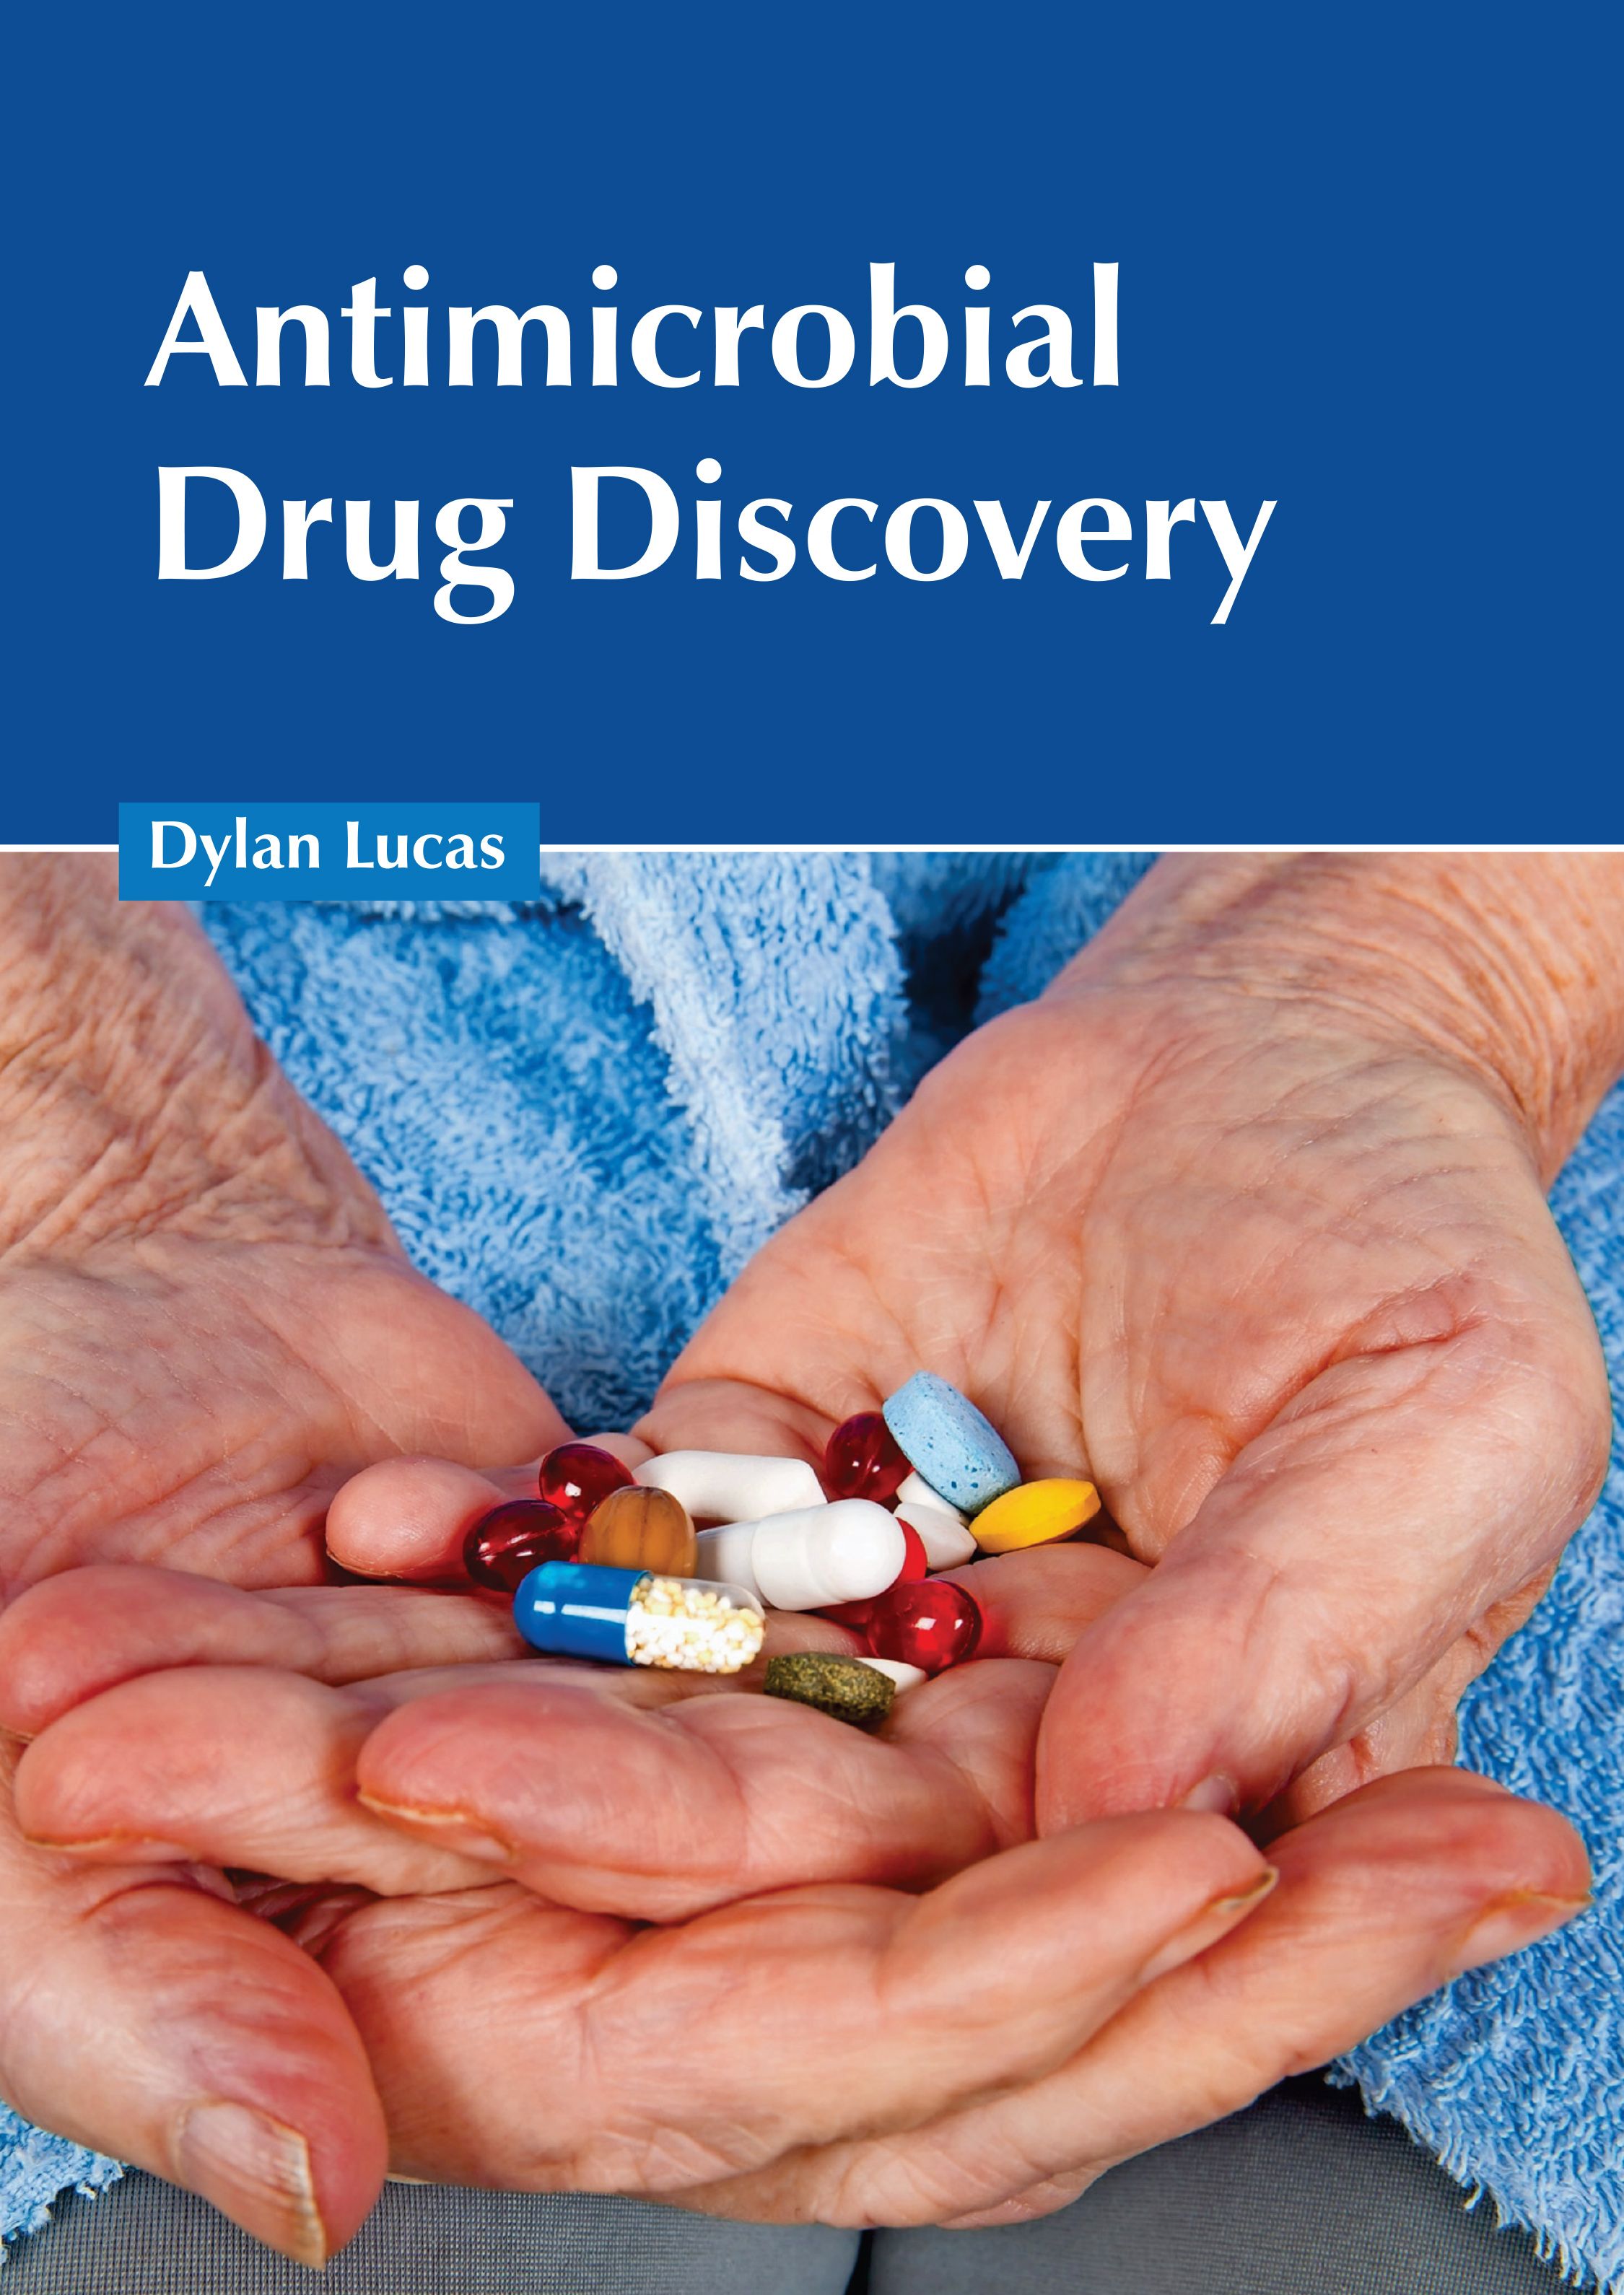 ANTIMICROBIAL DRUG DISCOVERY